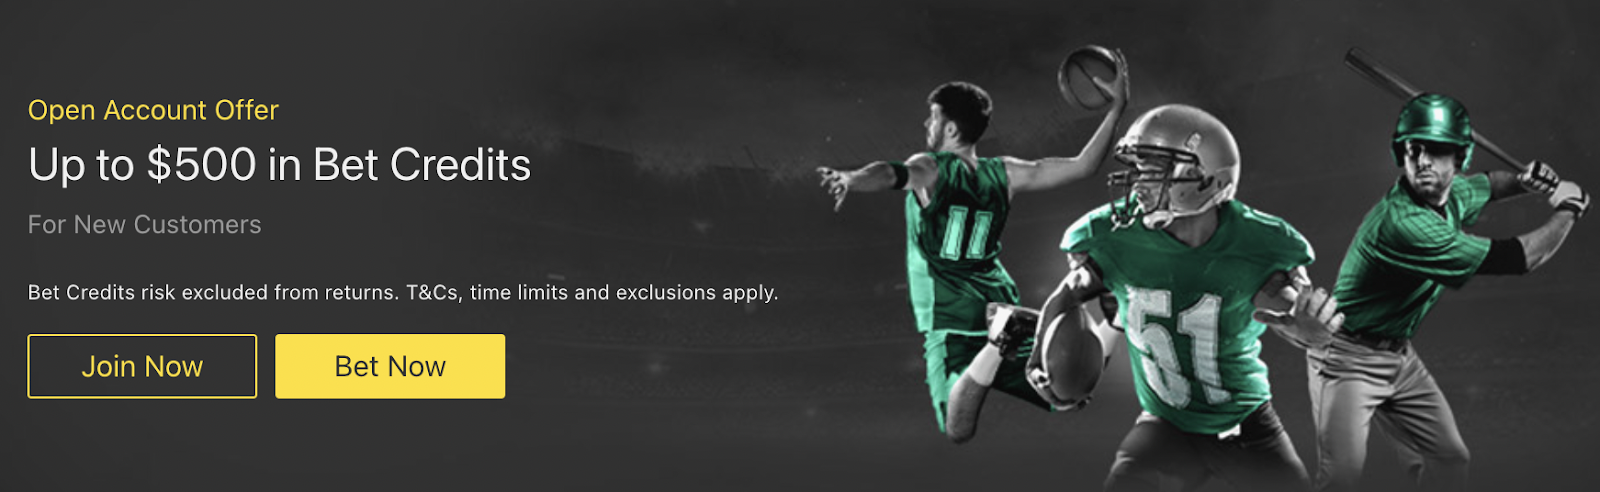 bet365 Sportsbook - $500 Bet Credits Welcome Offer